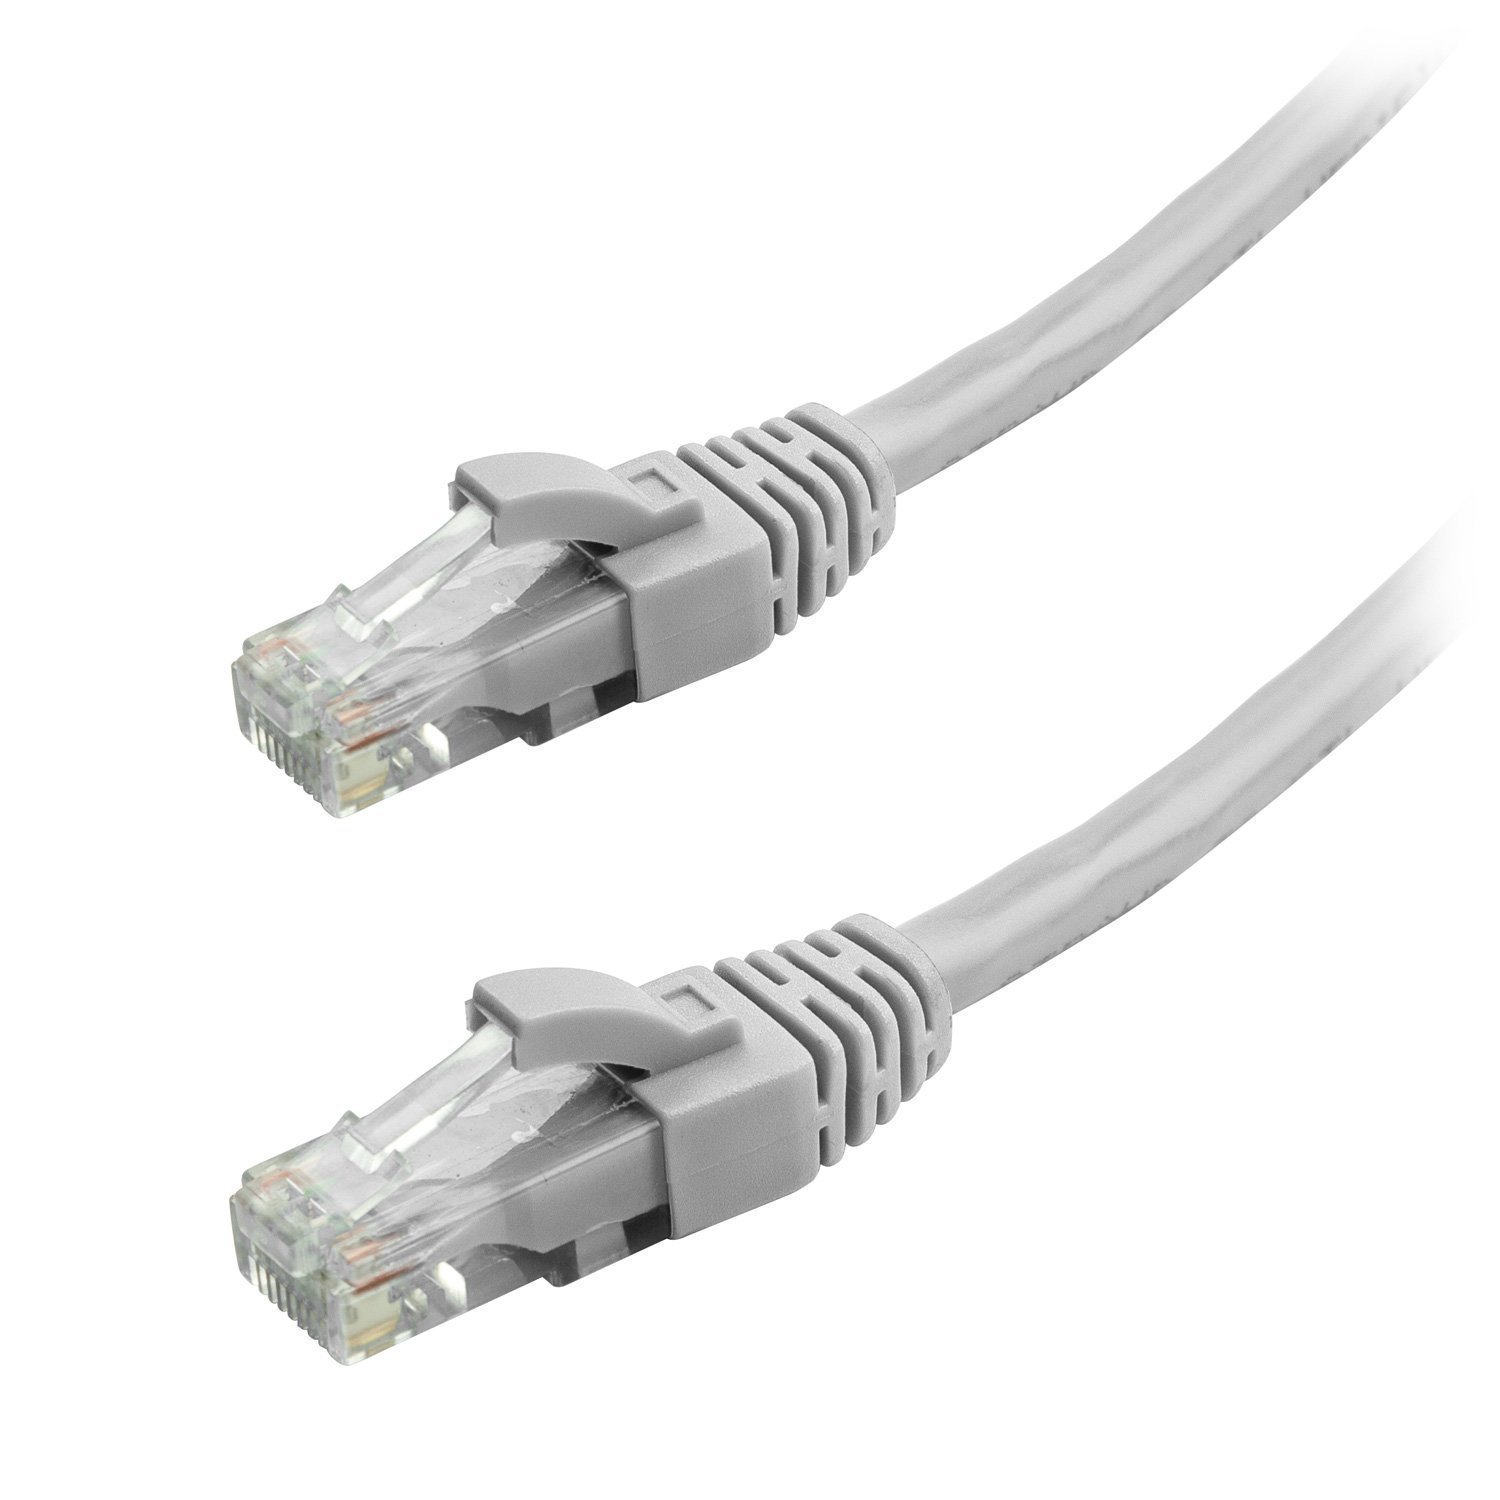 Importer520 Gray 25FT CAT5 CAT5e RJ45 PATCH ETHERNET NETWORK CABLE 25 FT For PC, Mac, Laptop, PS2, PS3, XBox, and XBox 360 - image 2 of 2